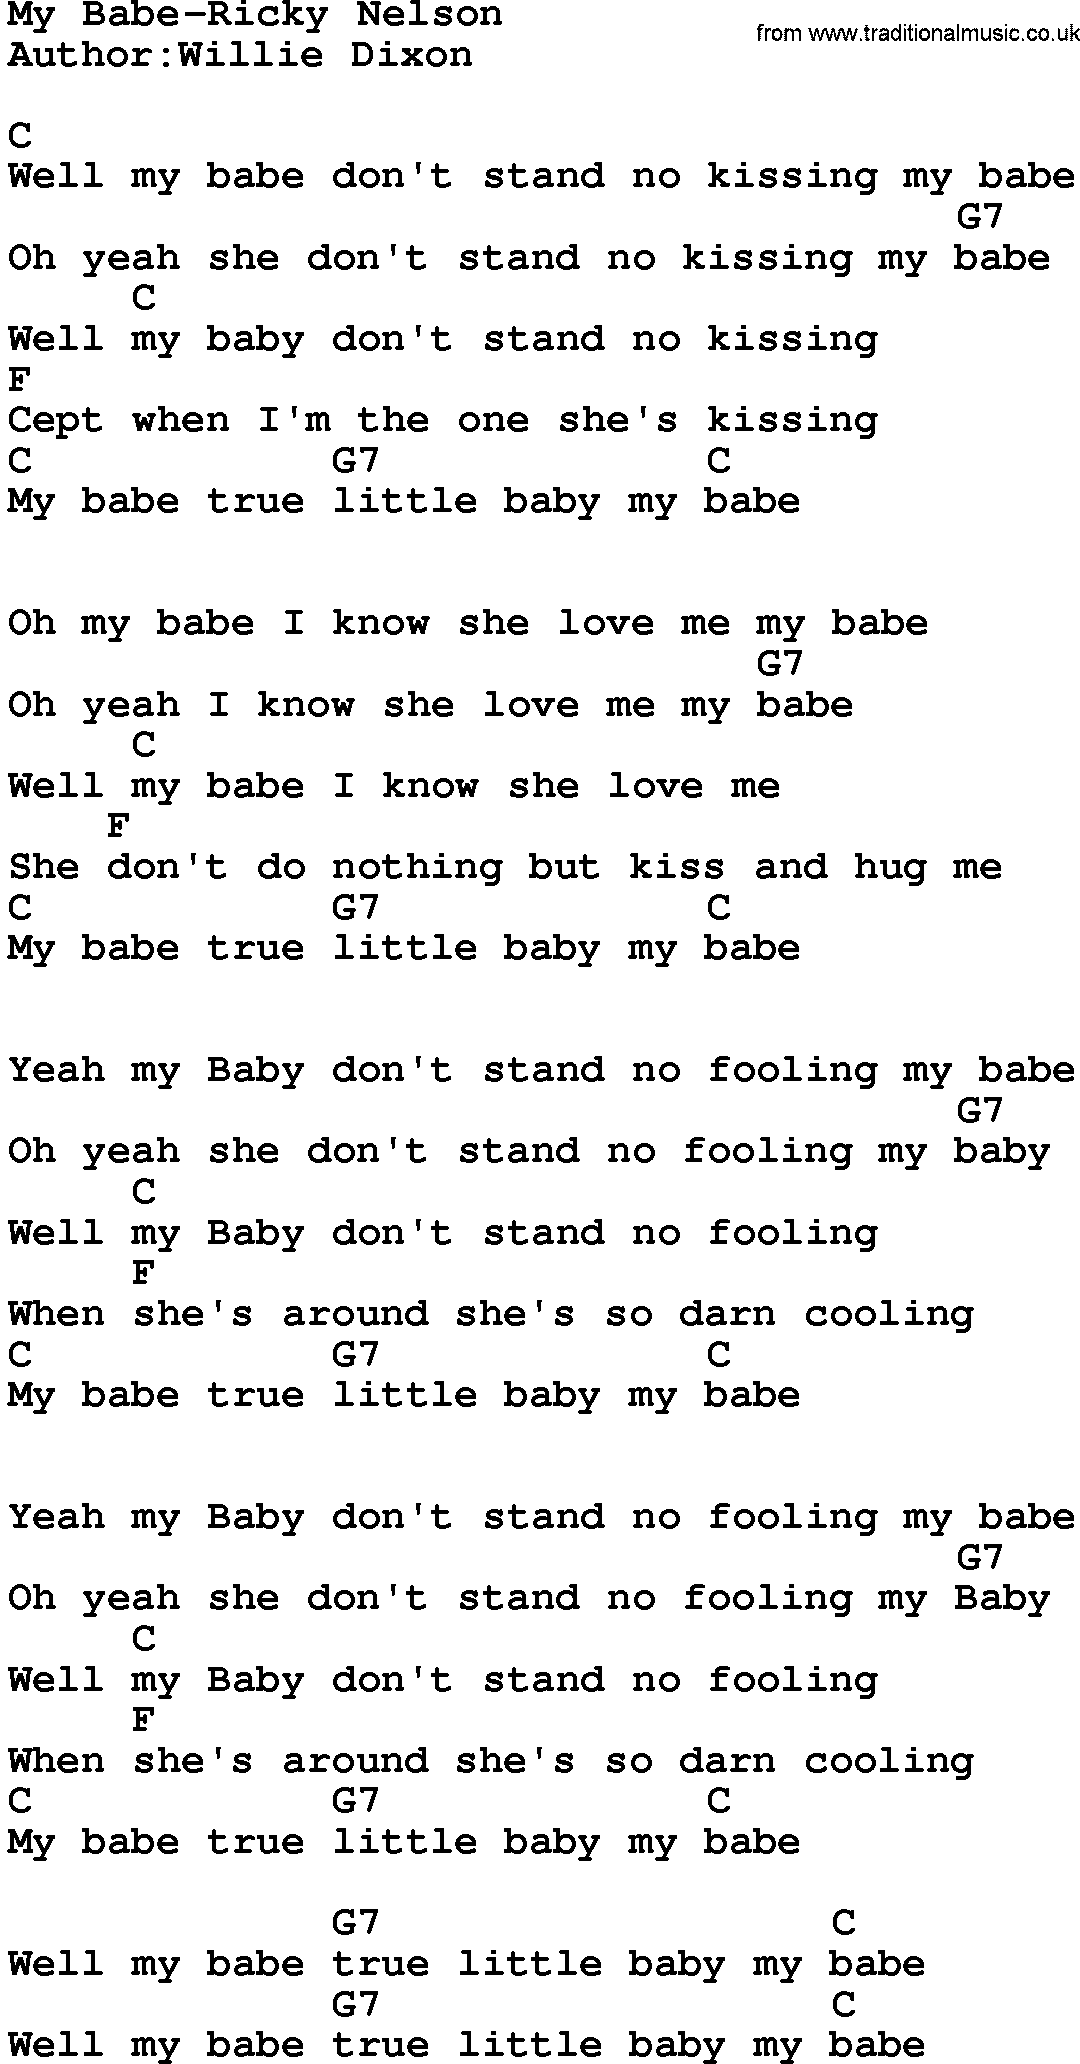 Country music song: My Babe-Ricky Nelson lyrics and chords